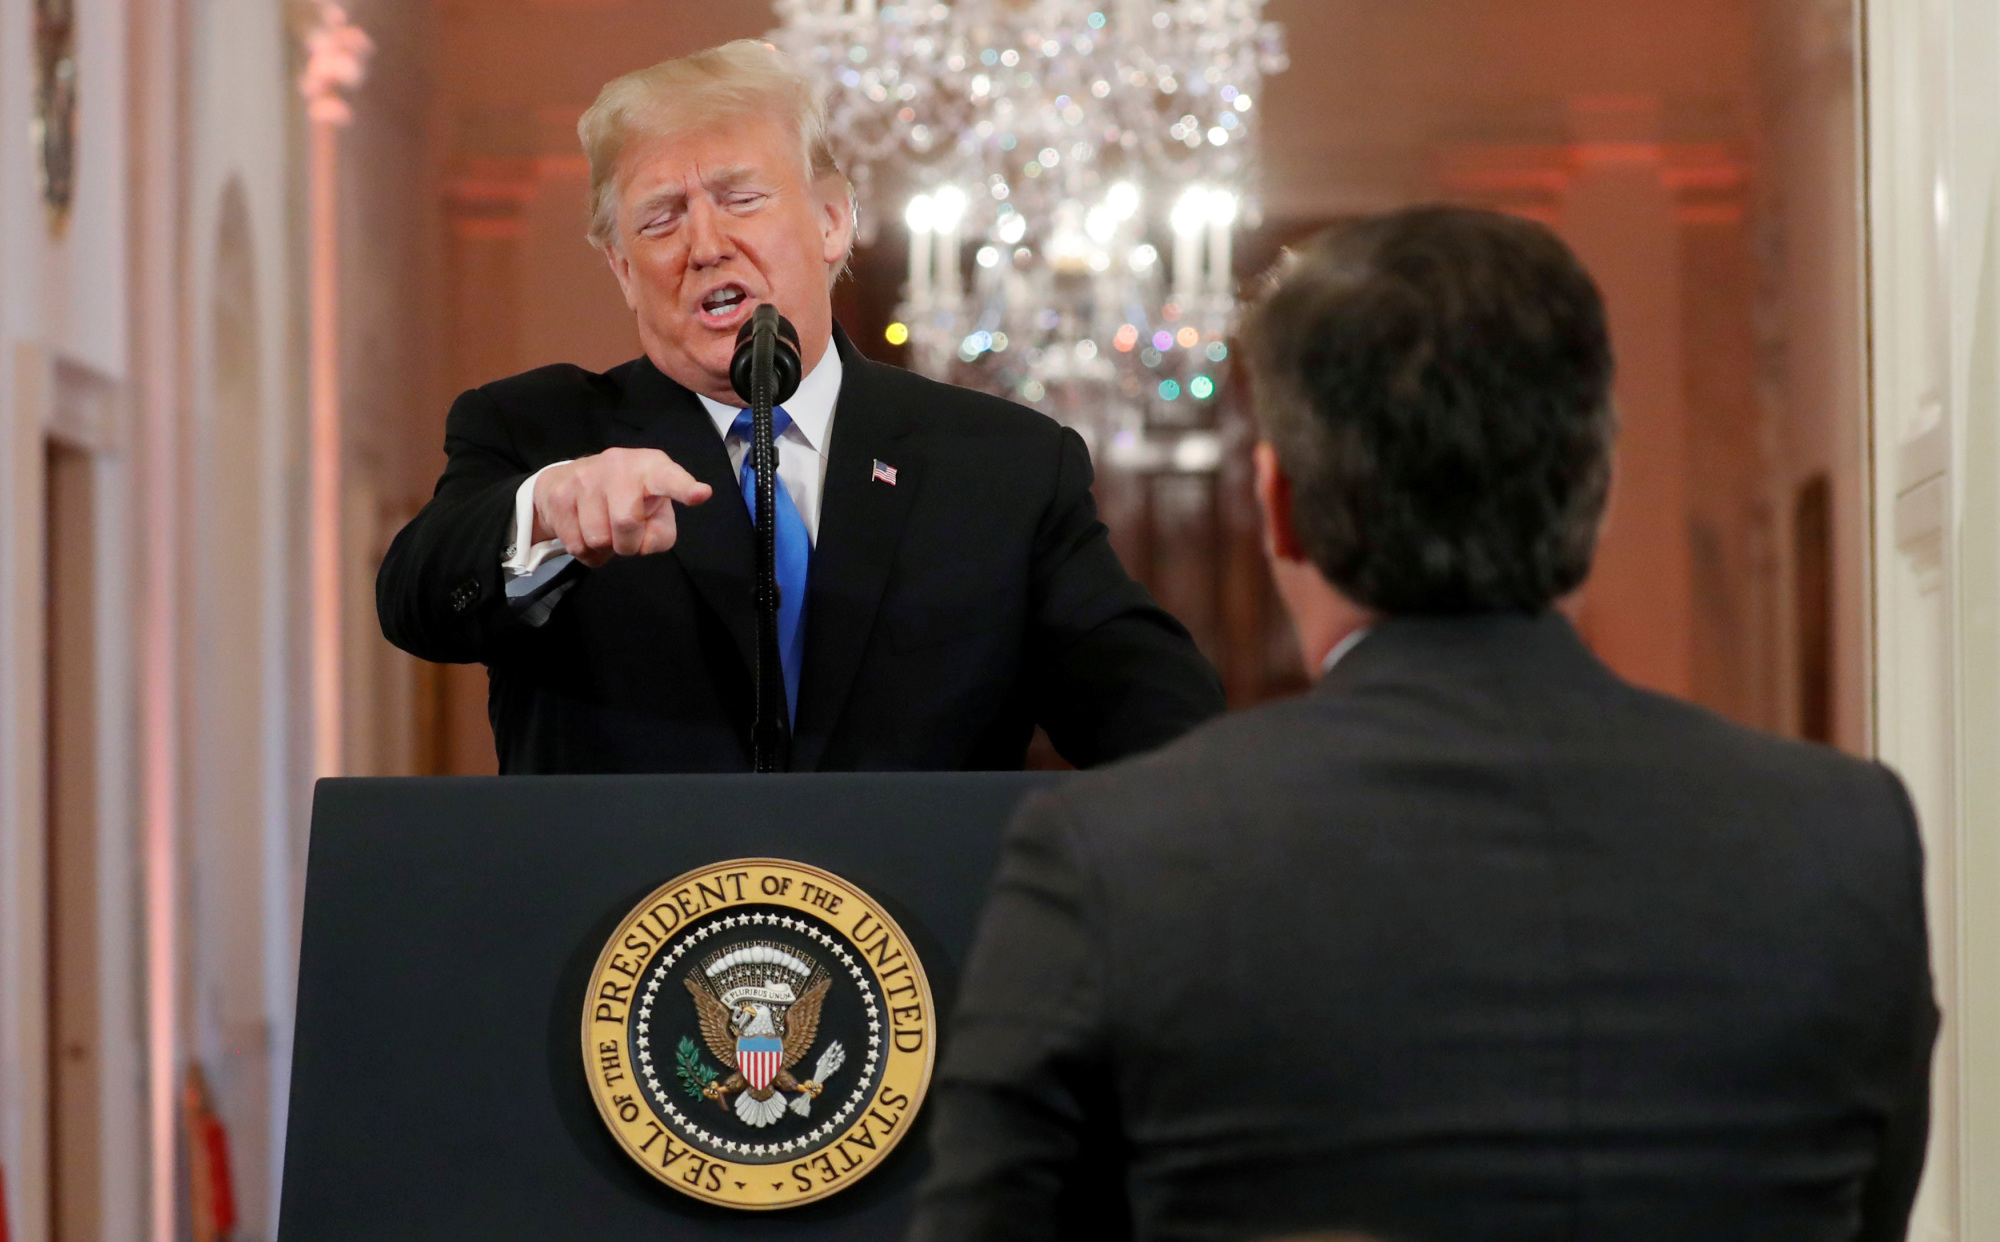 U.S. President Donald Trump points at CNN's Jim Acosta and accuses him of 'fake news' during a news conference at the White House on Wednesday. | REUTERS